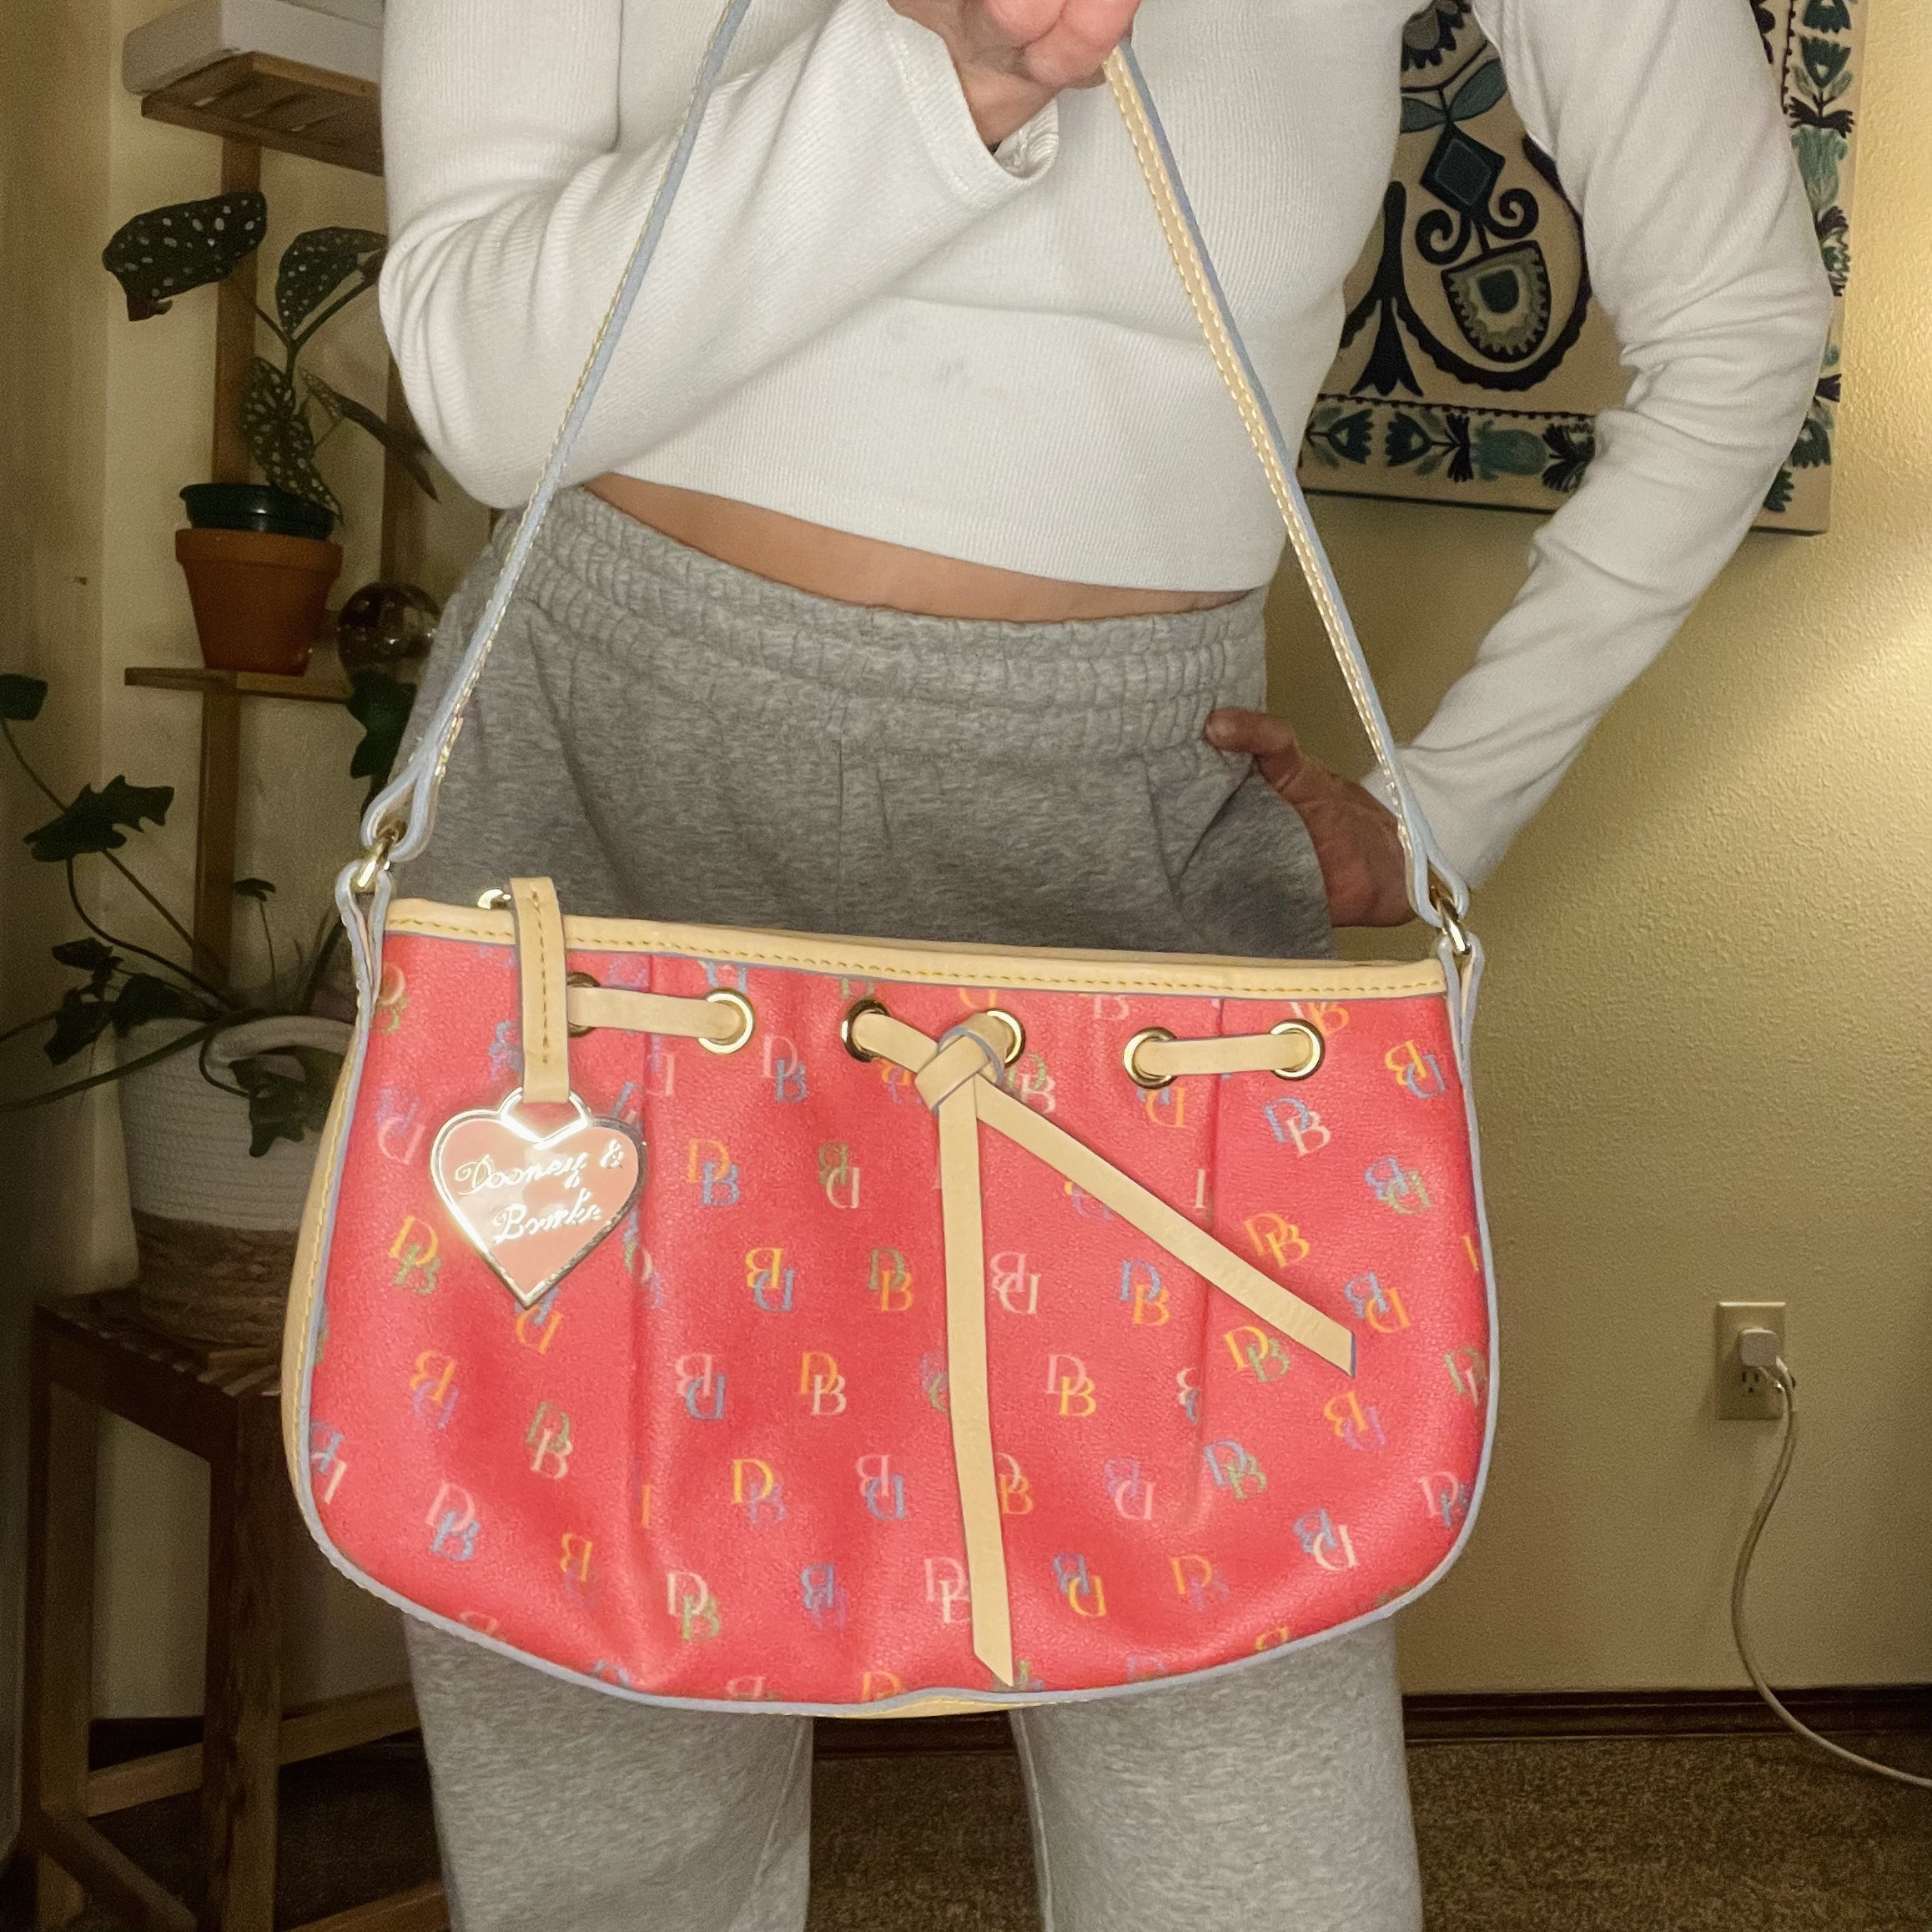 Can you help me date this Dooney & Bourke bag?